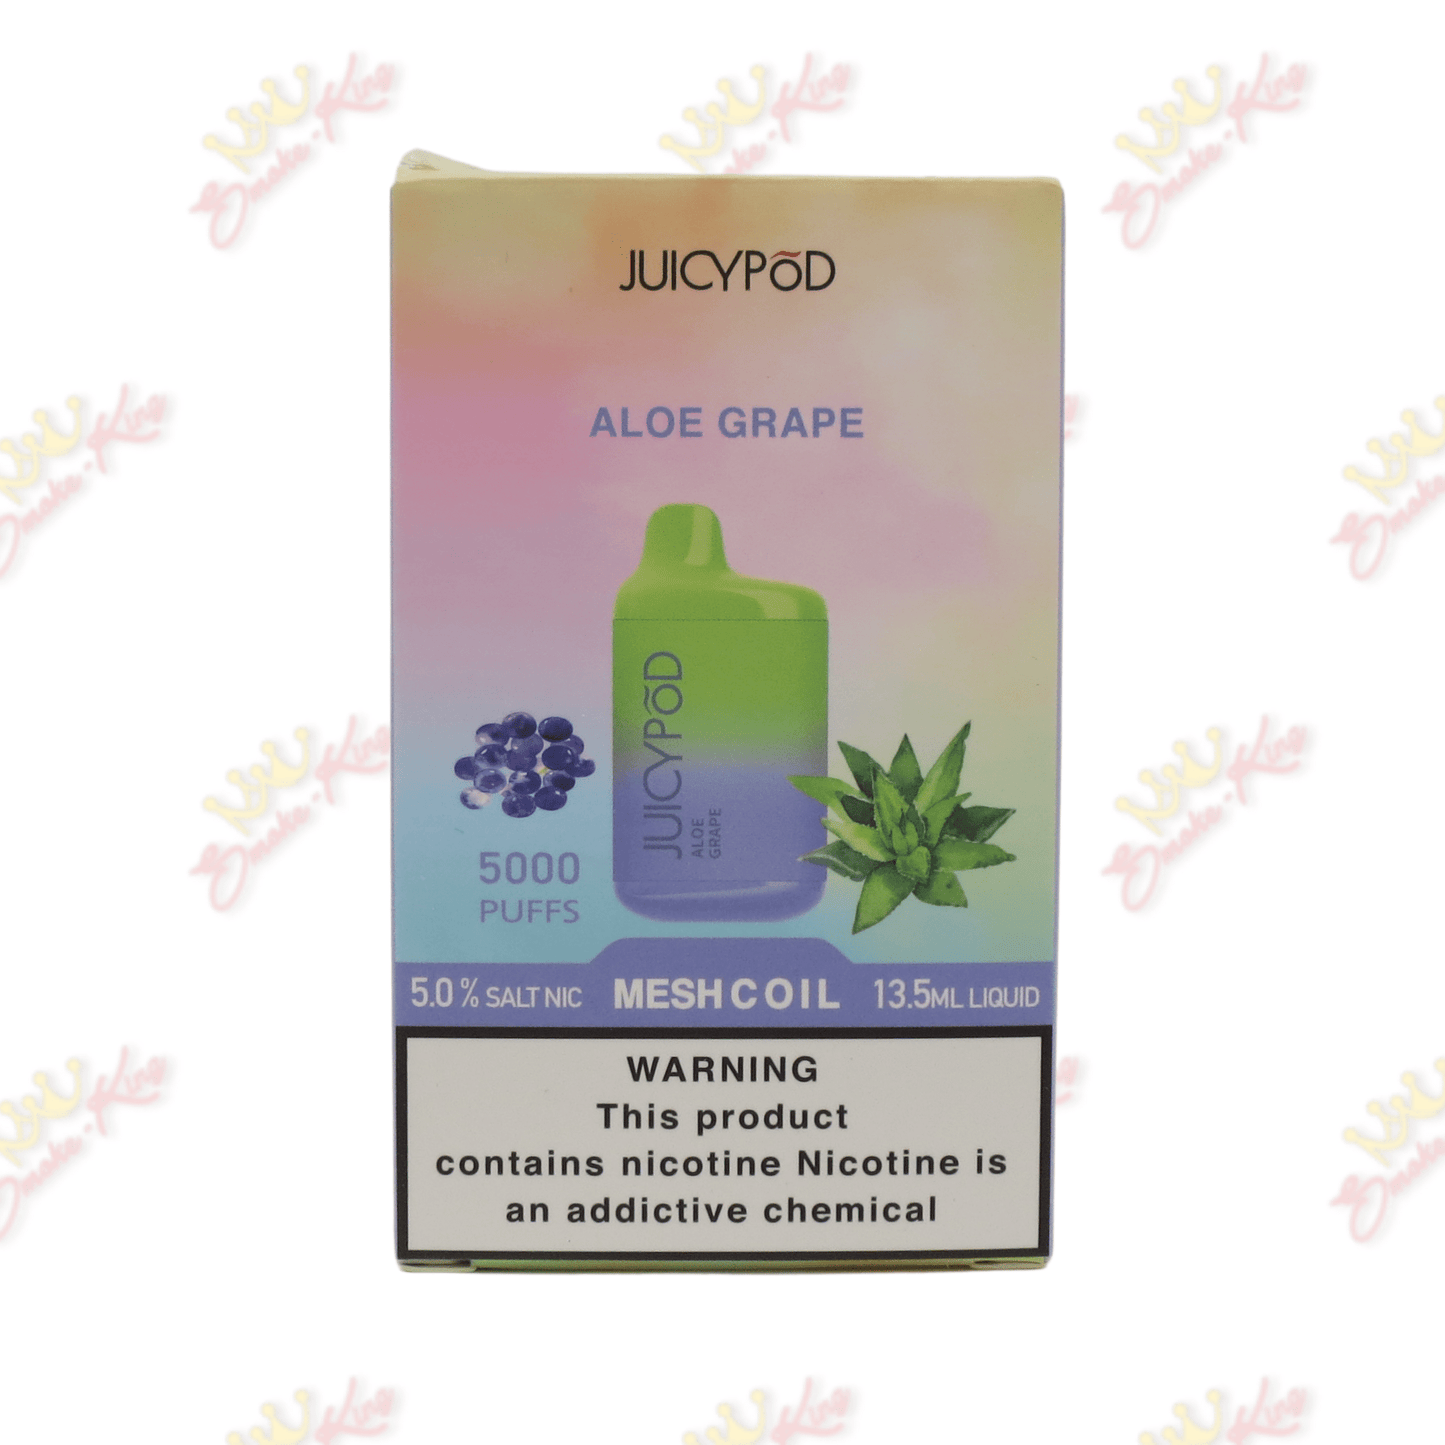 Juicy Pods Disposable Vapes Aloe Grape / One for $19.99 Juicy Pod (5000 Puffs)